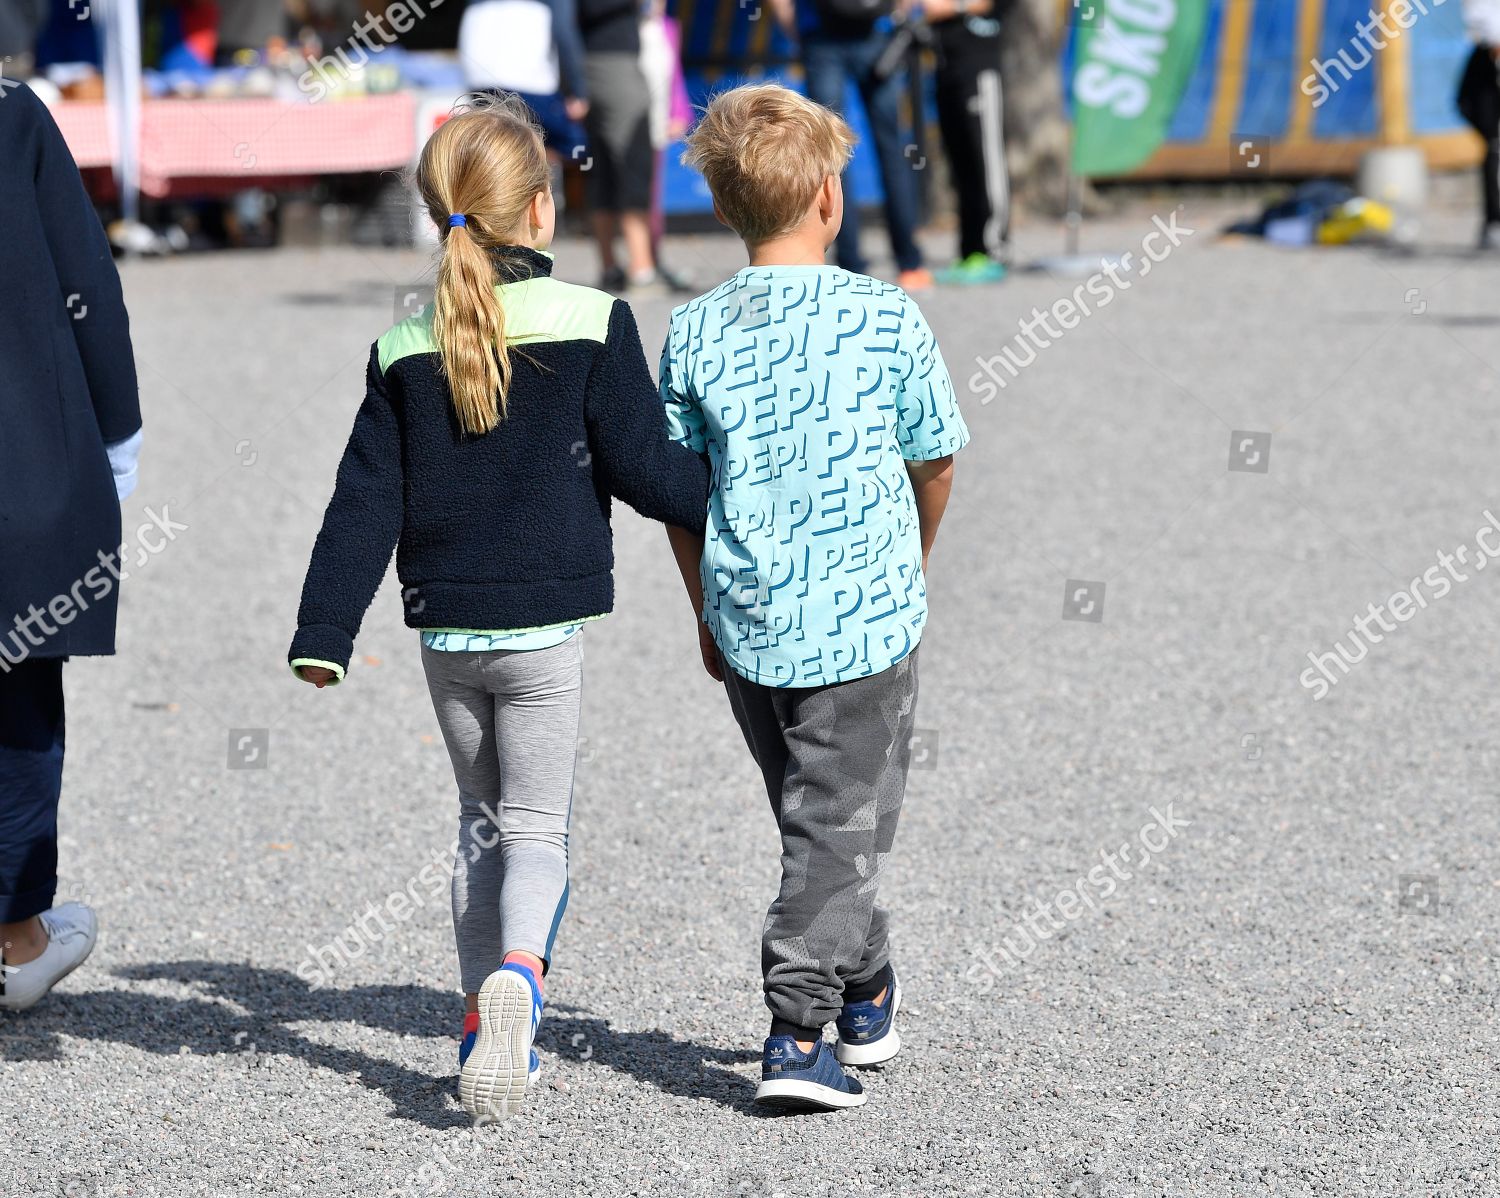 race-and-pep-day-stockholm-sweden-shutterstock-editorial-9884341aq.jpg